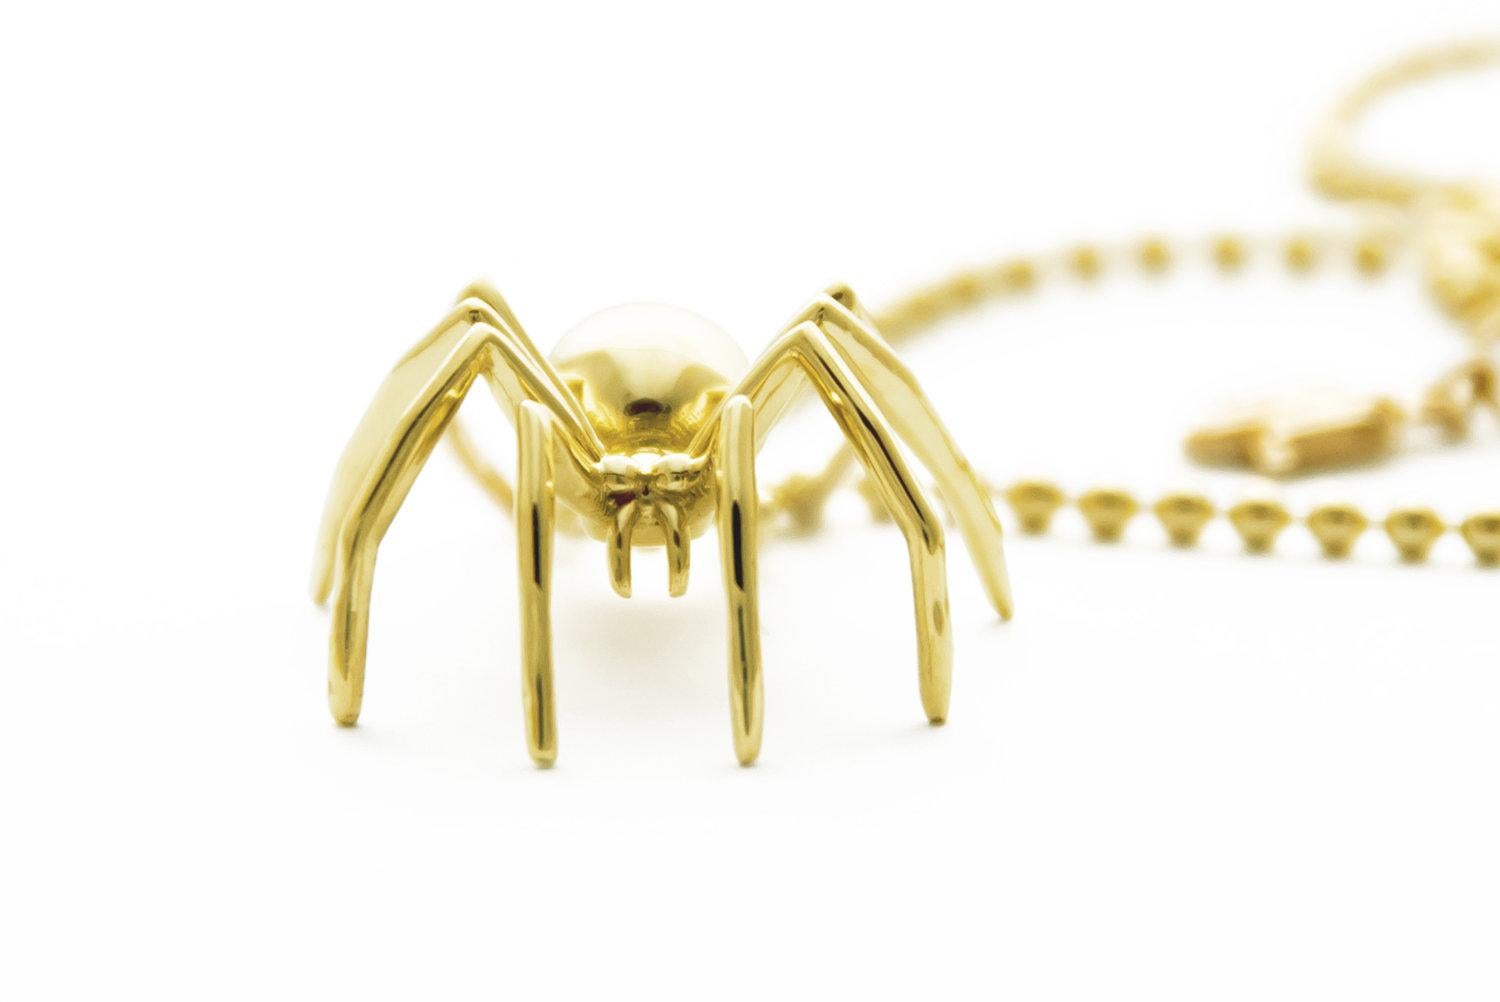 Prepare to be enchanted by the timeless elegance of the Medium Spider Pendant Yellow Gold Plated, a mesmerizing symbol of creativity and self-determination. Revered as the master of its own destiny, the spider has long captivated our imagination